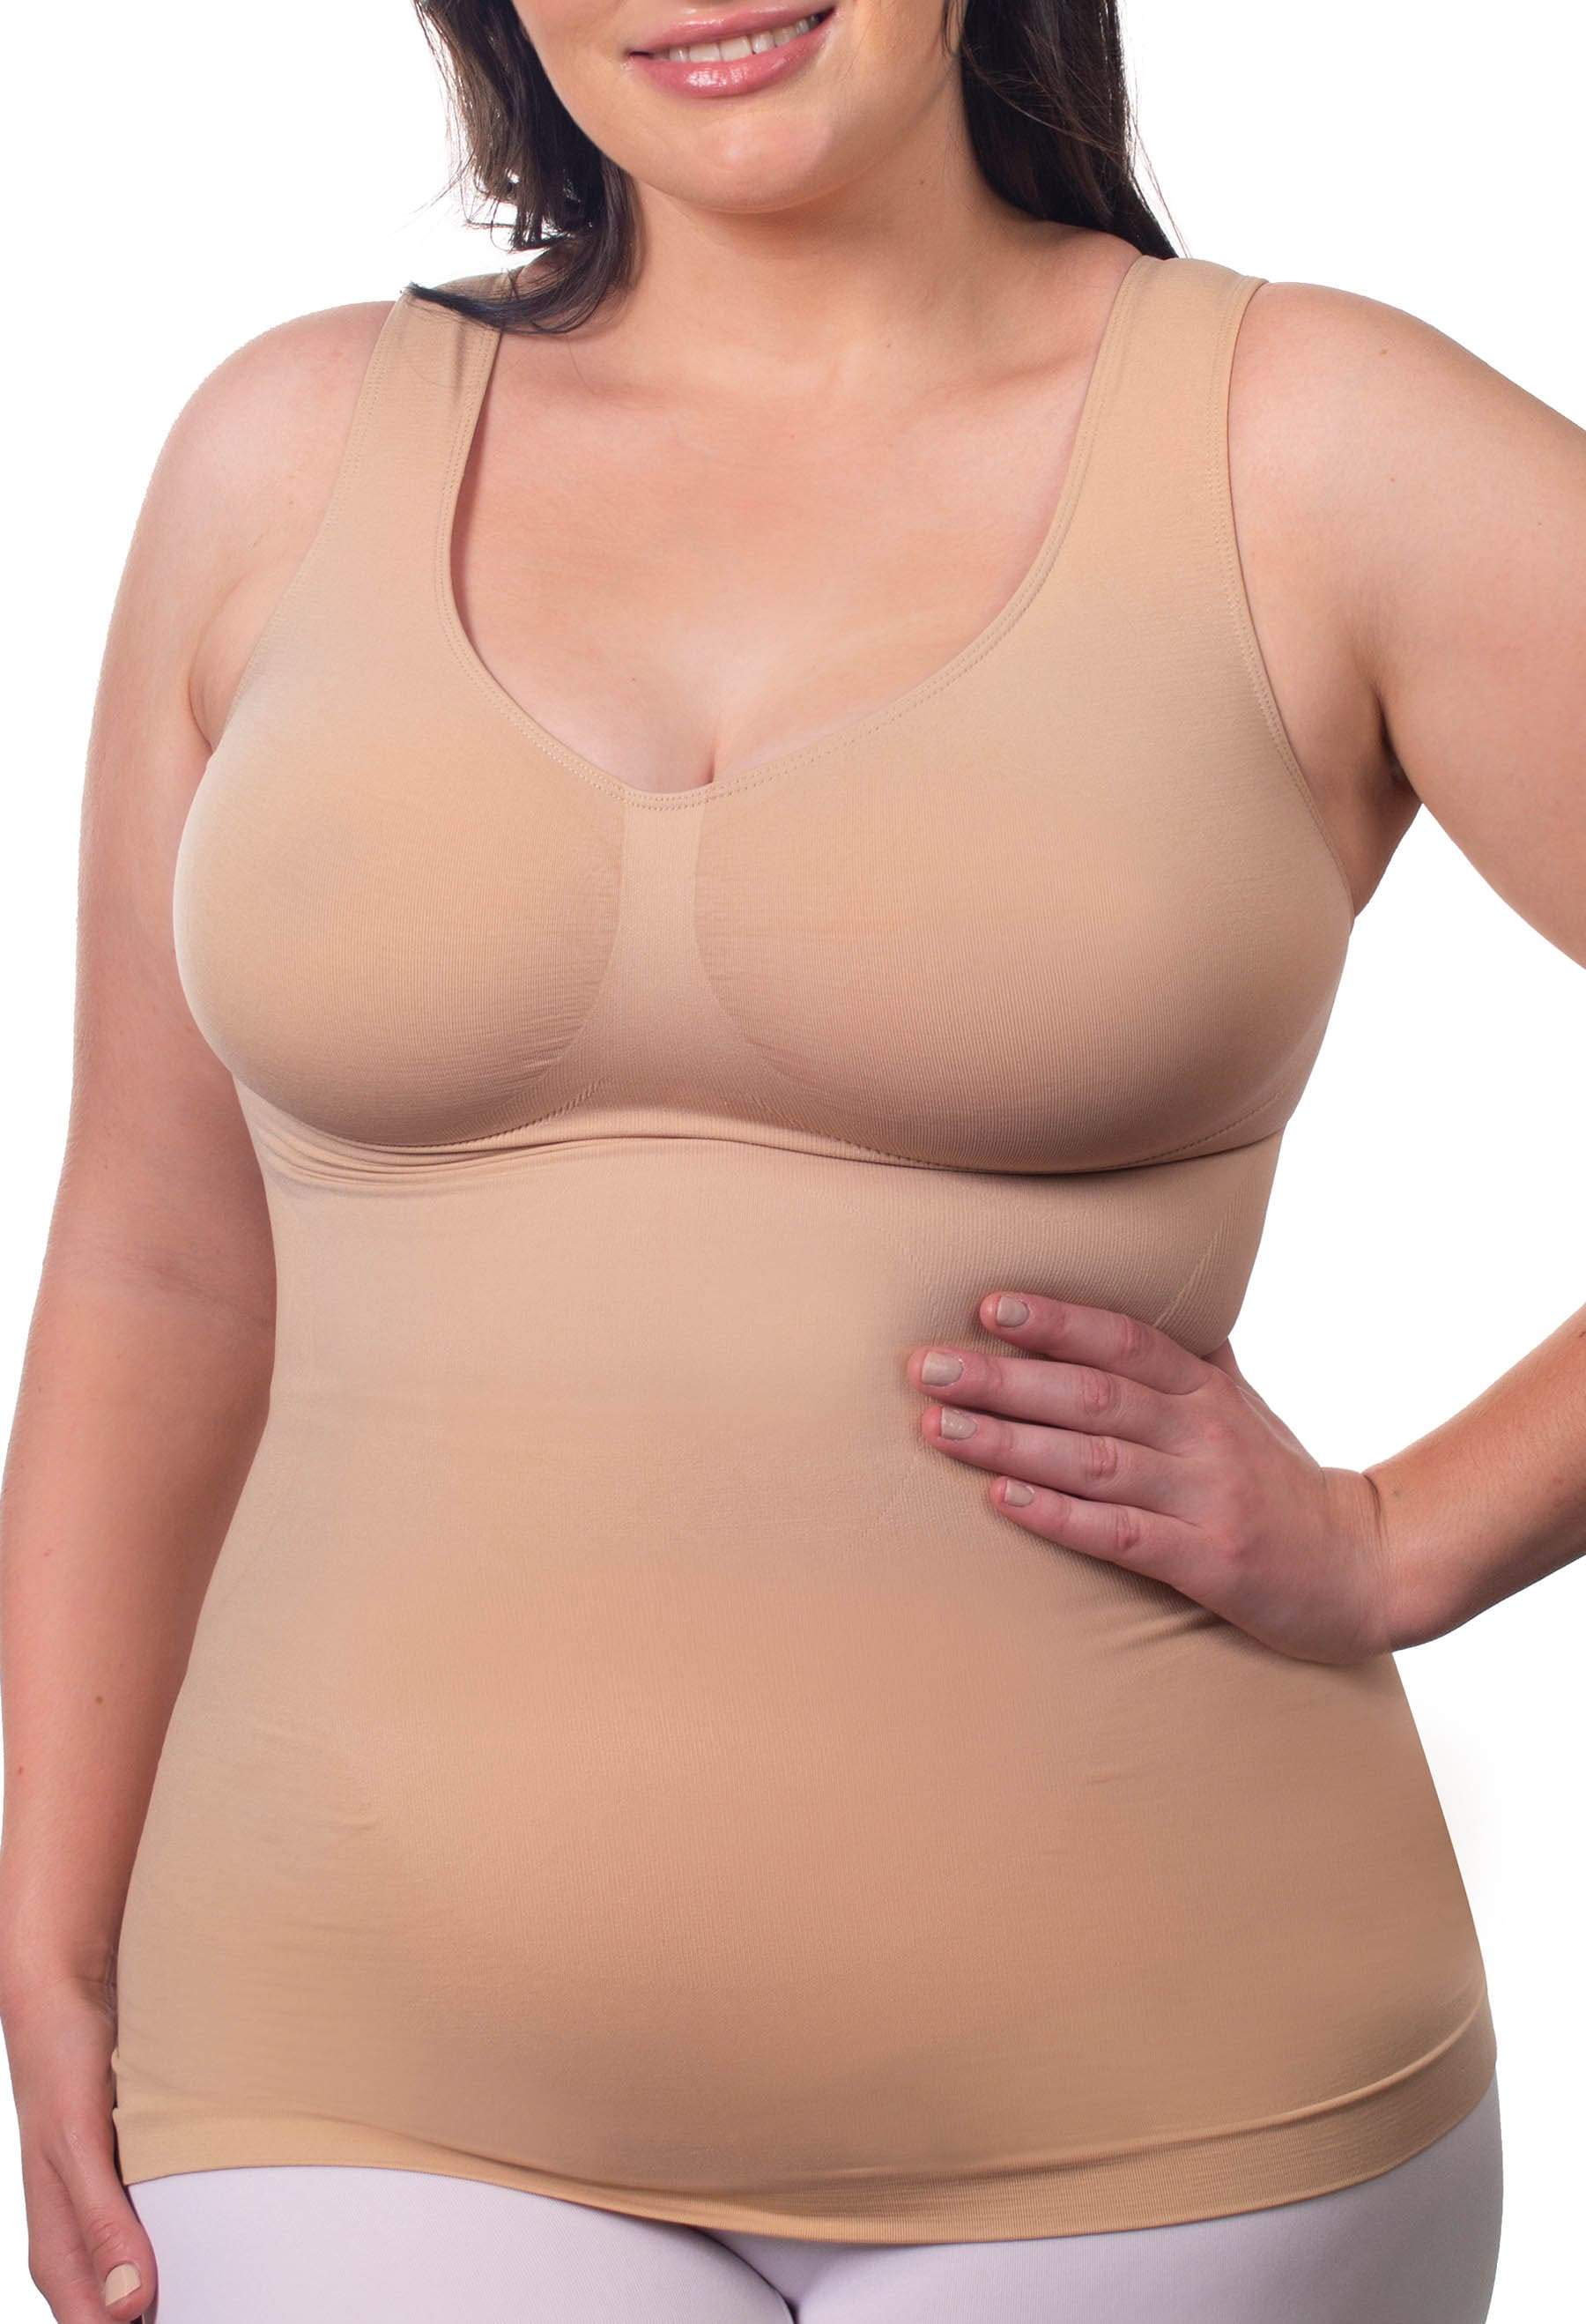 Nursing Top With Shapewear White Xlarge, Shop Today. Get it Tomorrow!